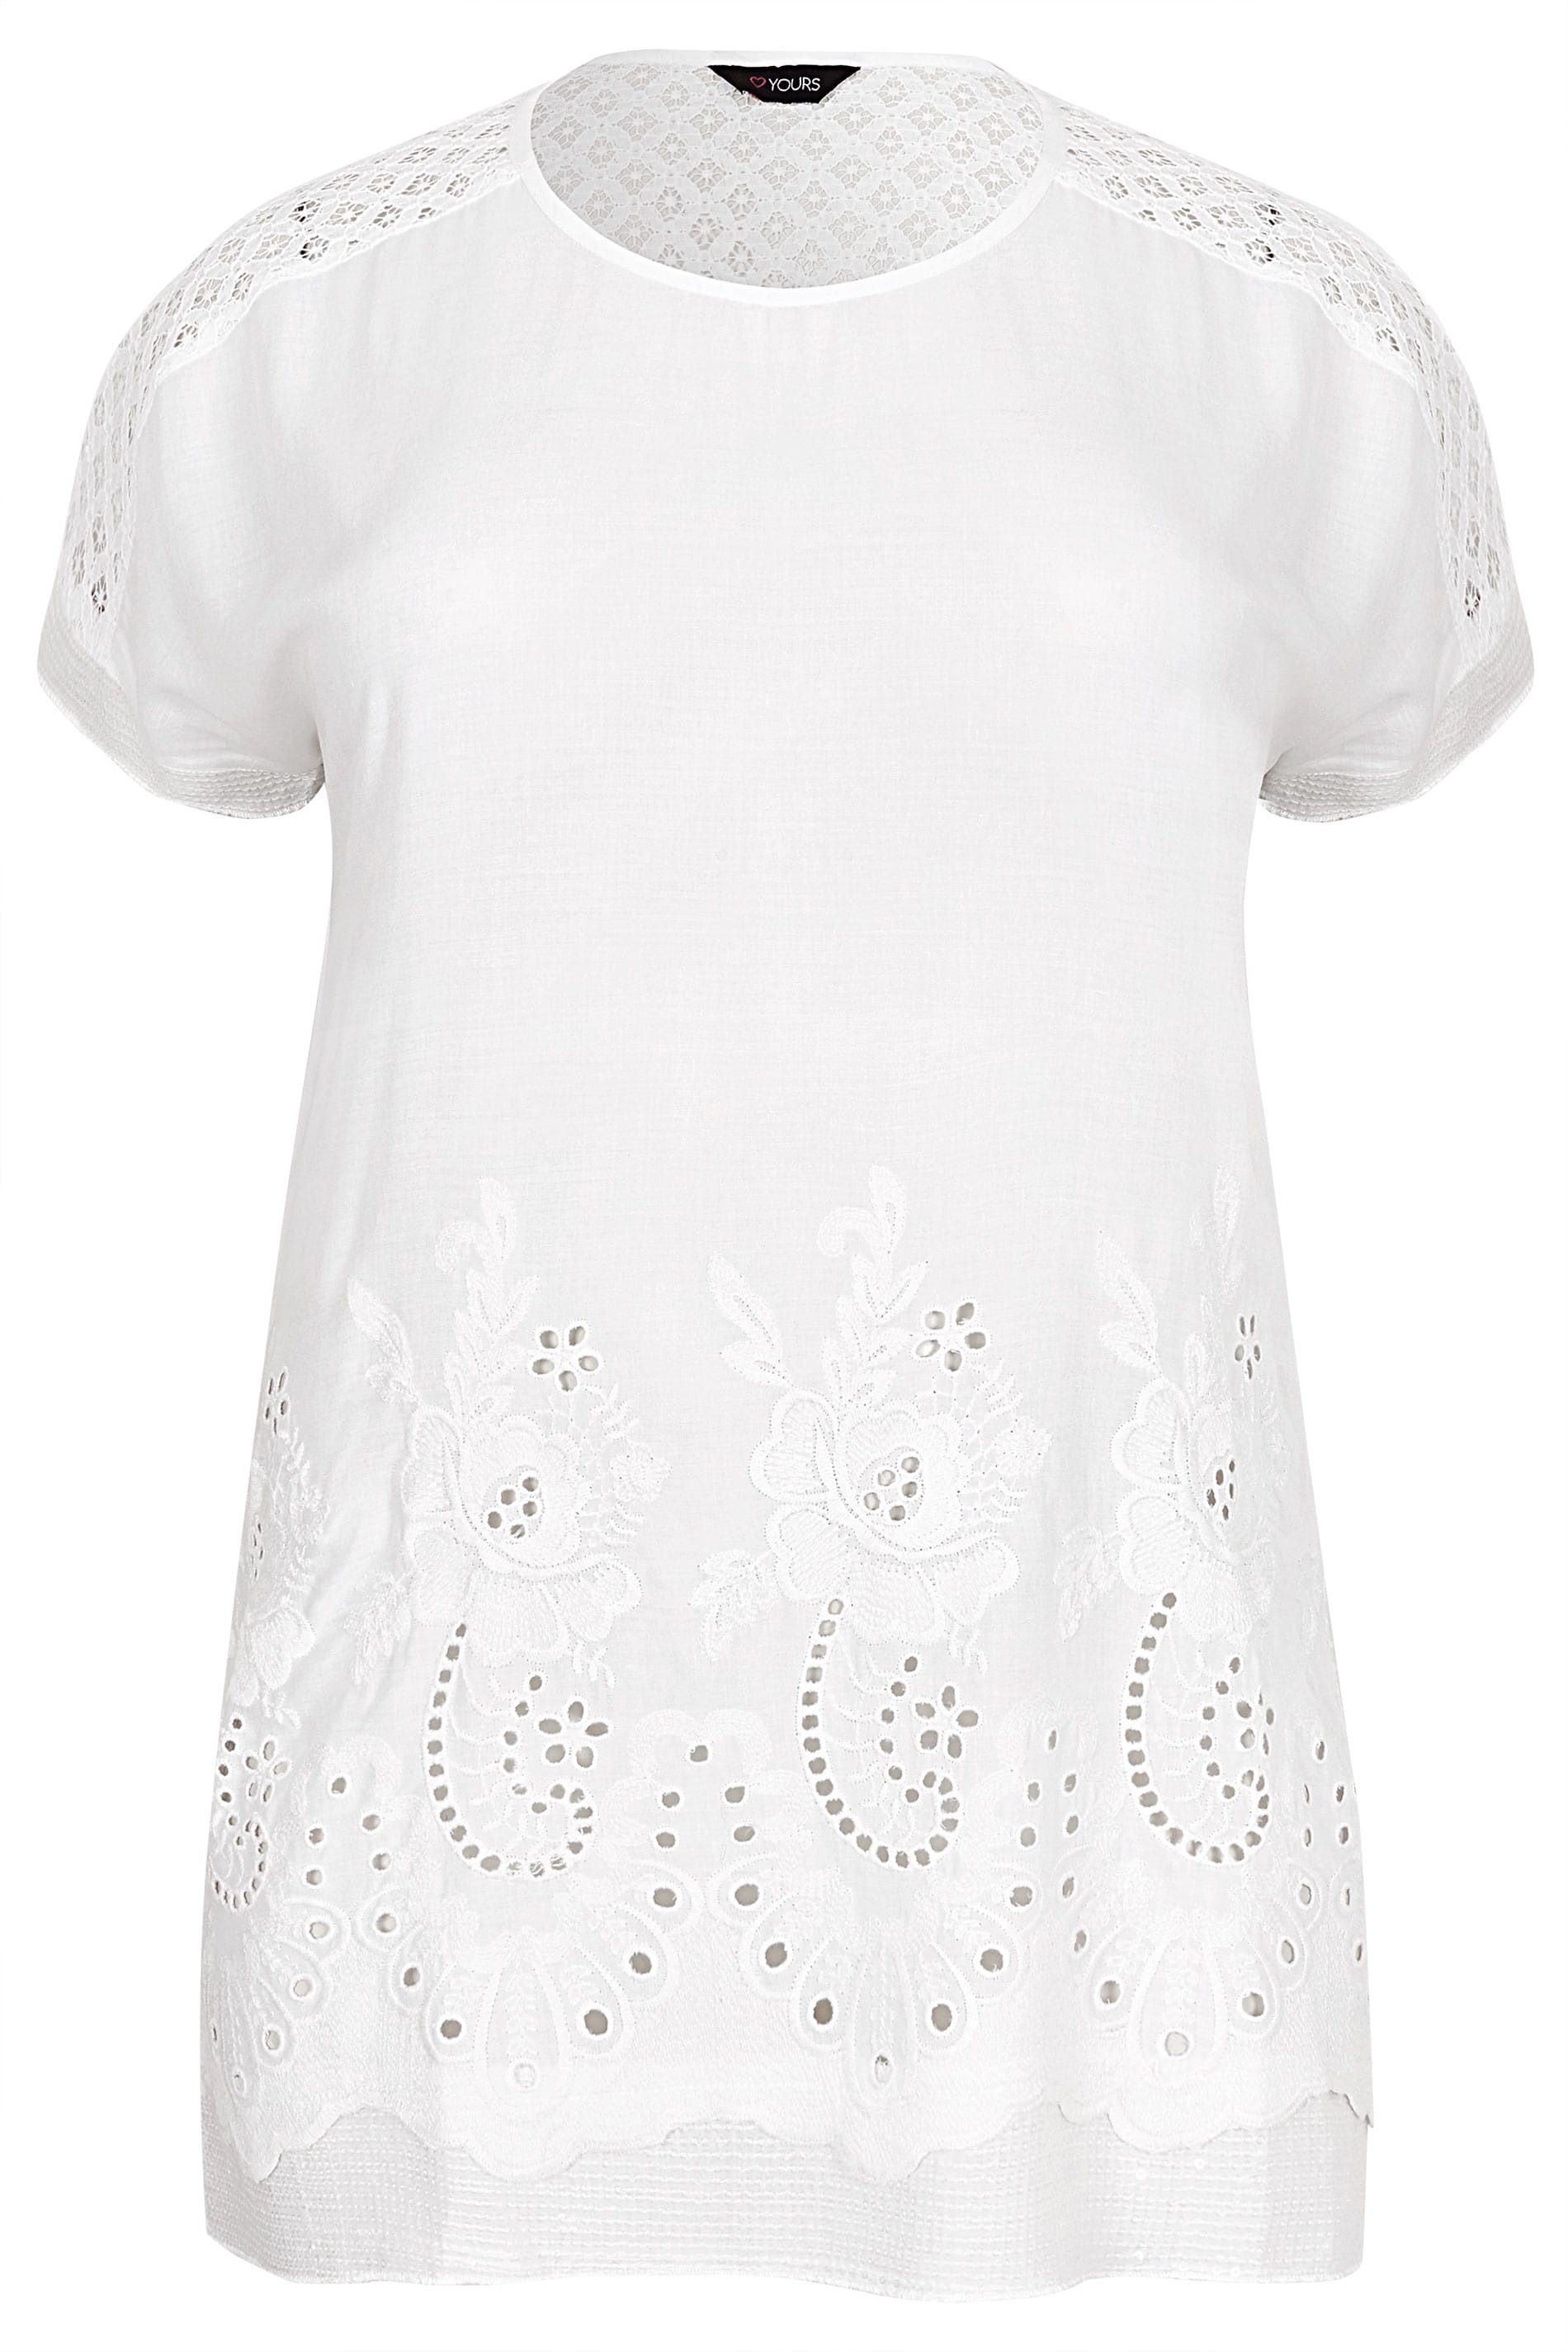 White Embroidered Sequin Blouse | Plus Sizes 16 to 36 | Yours Clothing